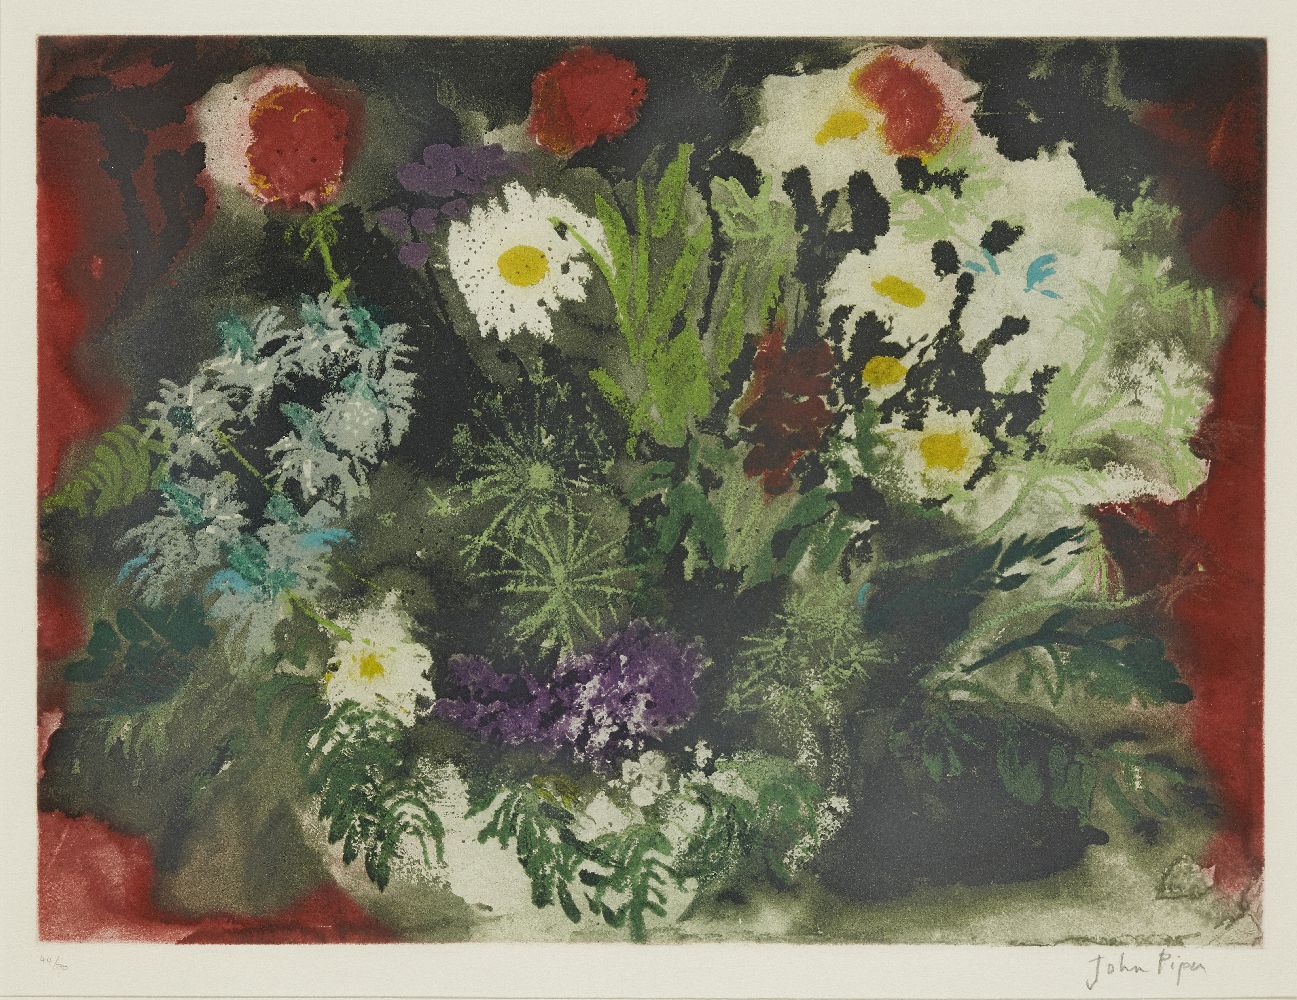 John Piper CH, British 1903-1992- Late Summer Flowers [Levinson 419], 1989; etching with aquatint in